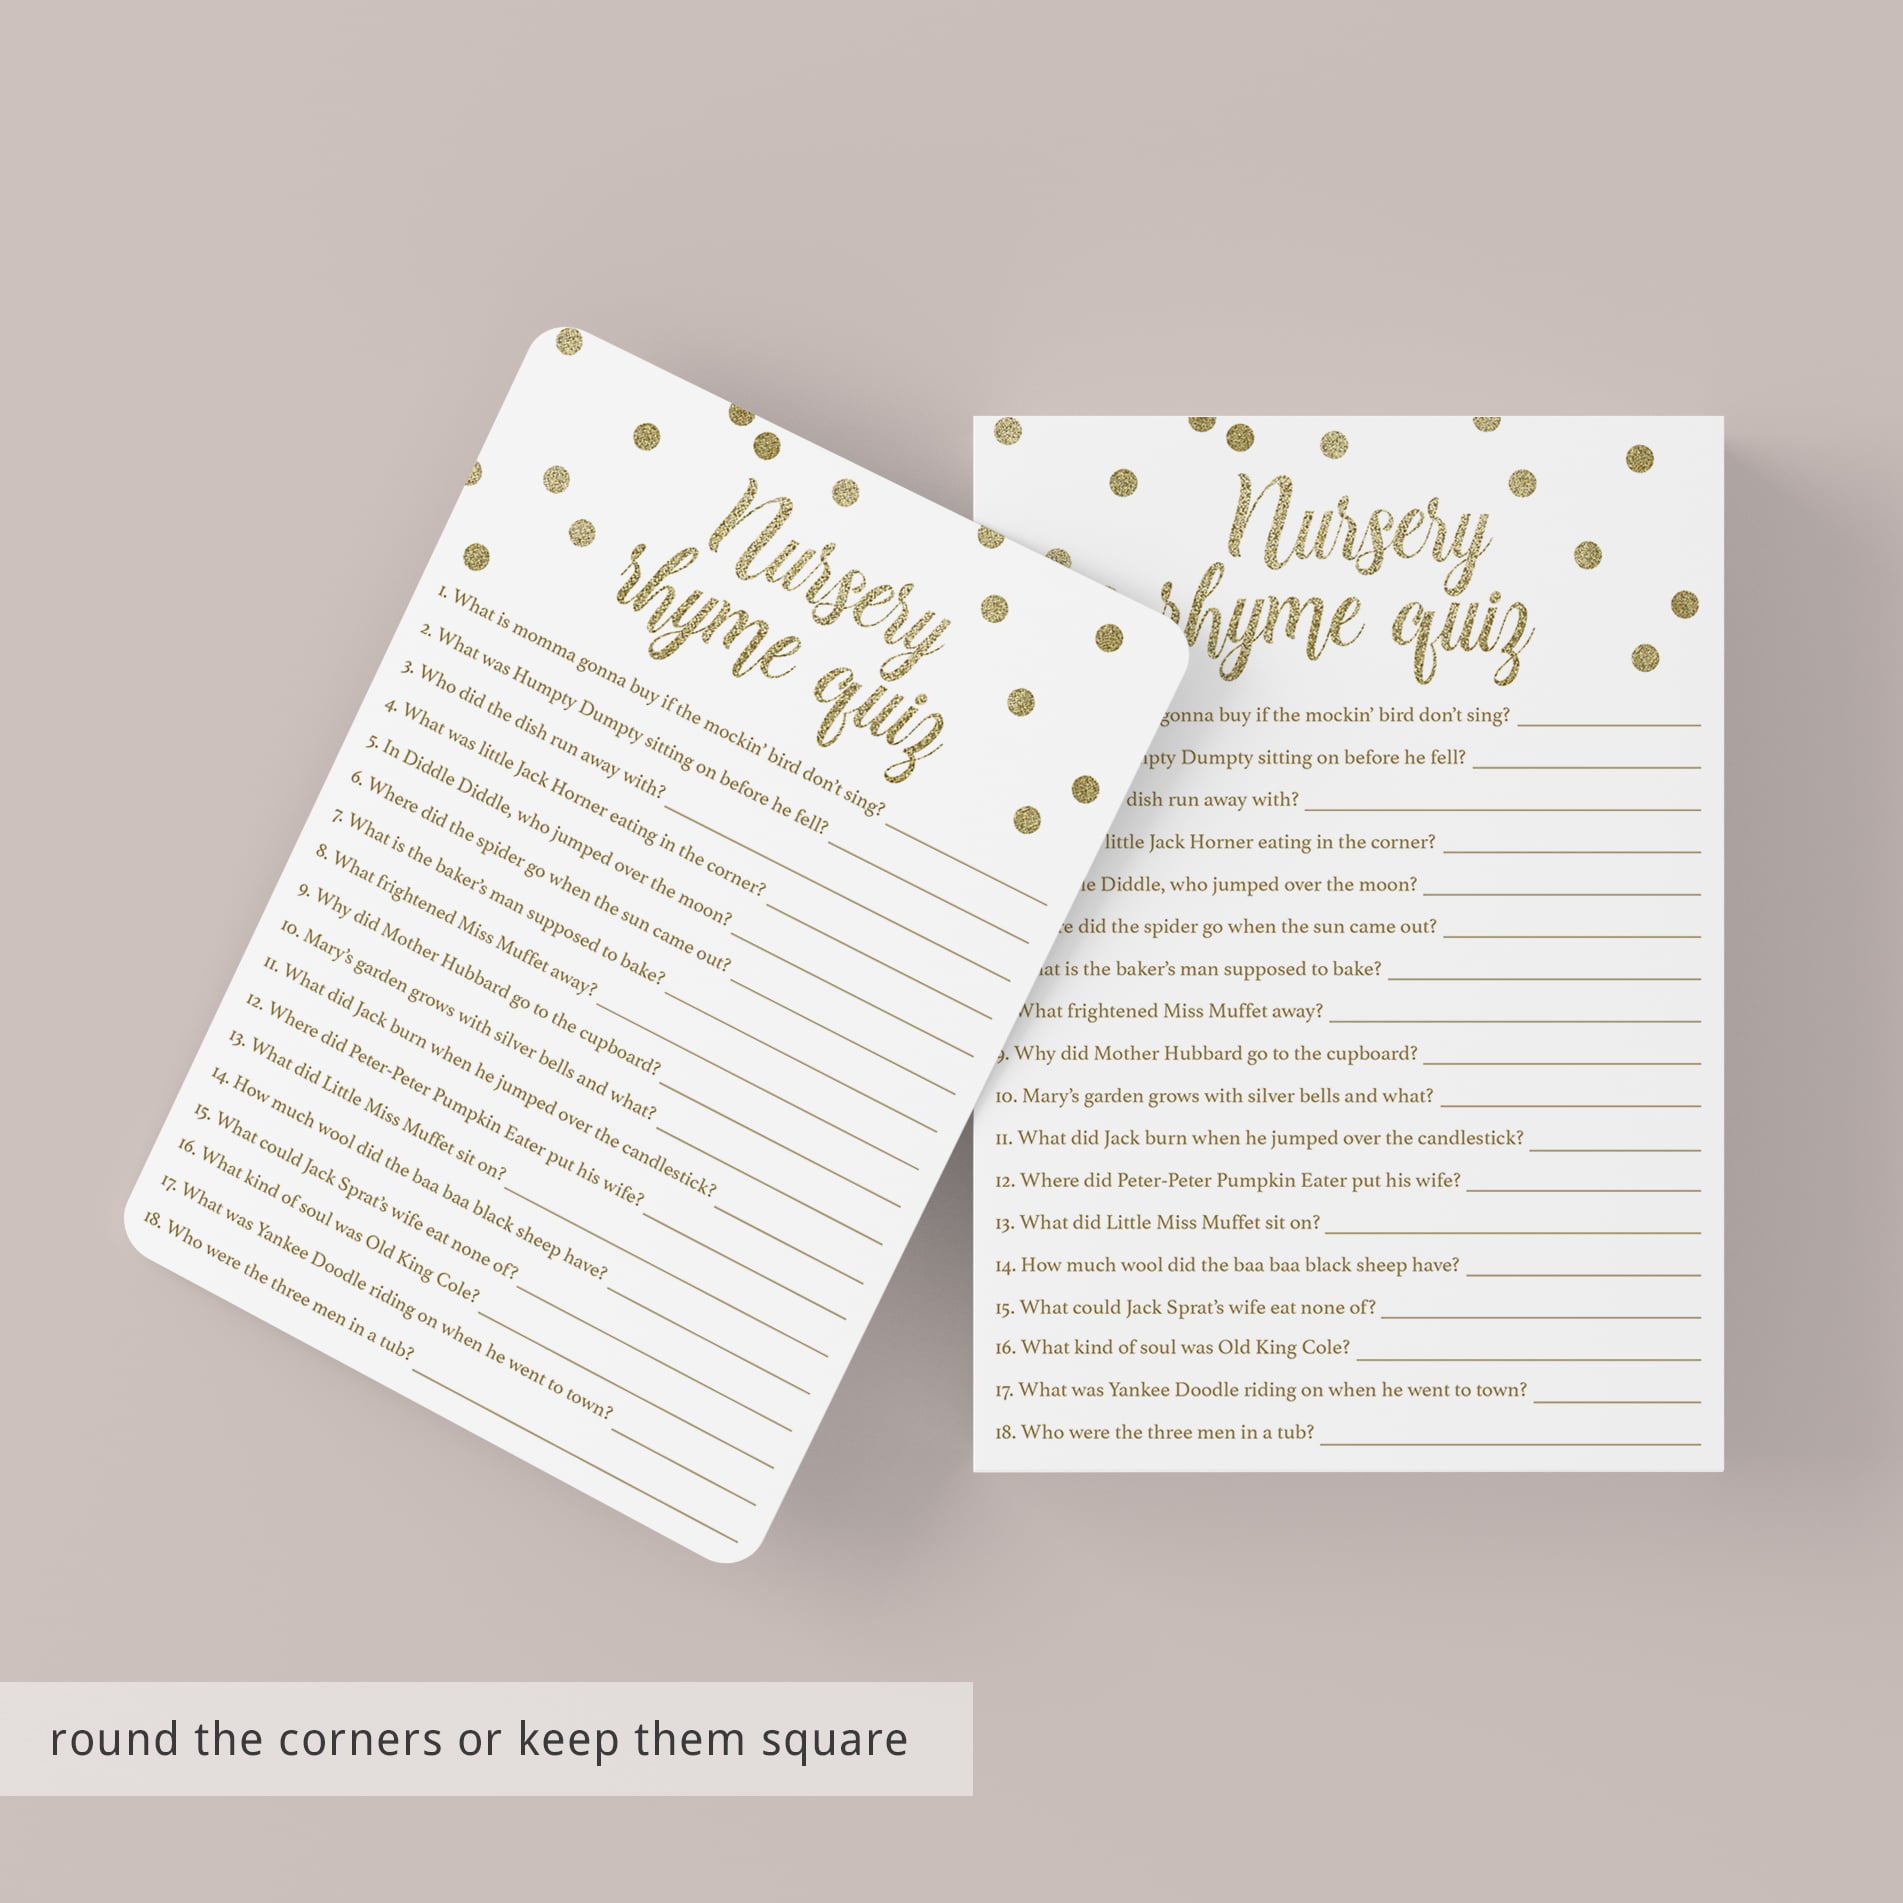 Nursery rhyme answers printable gold by LittleSizzle